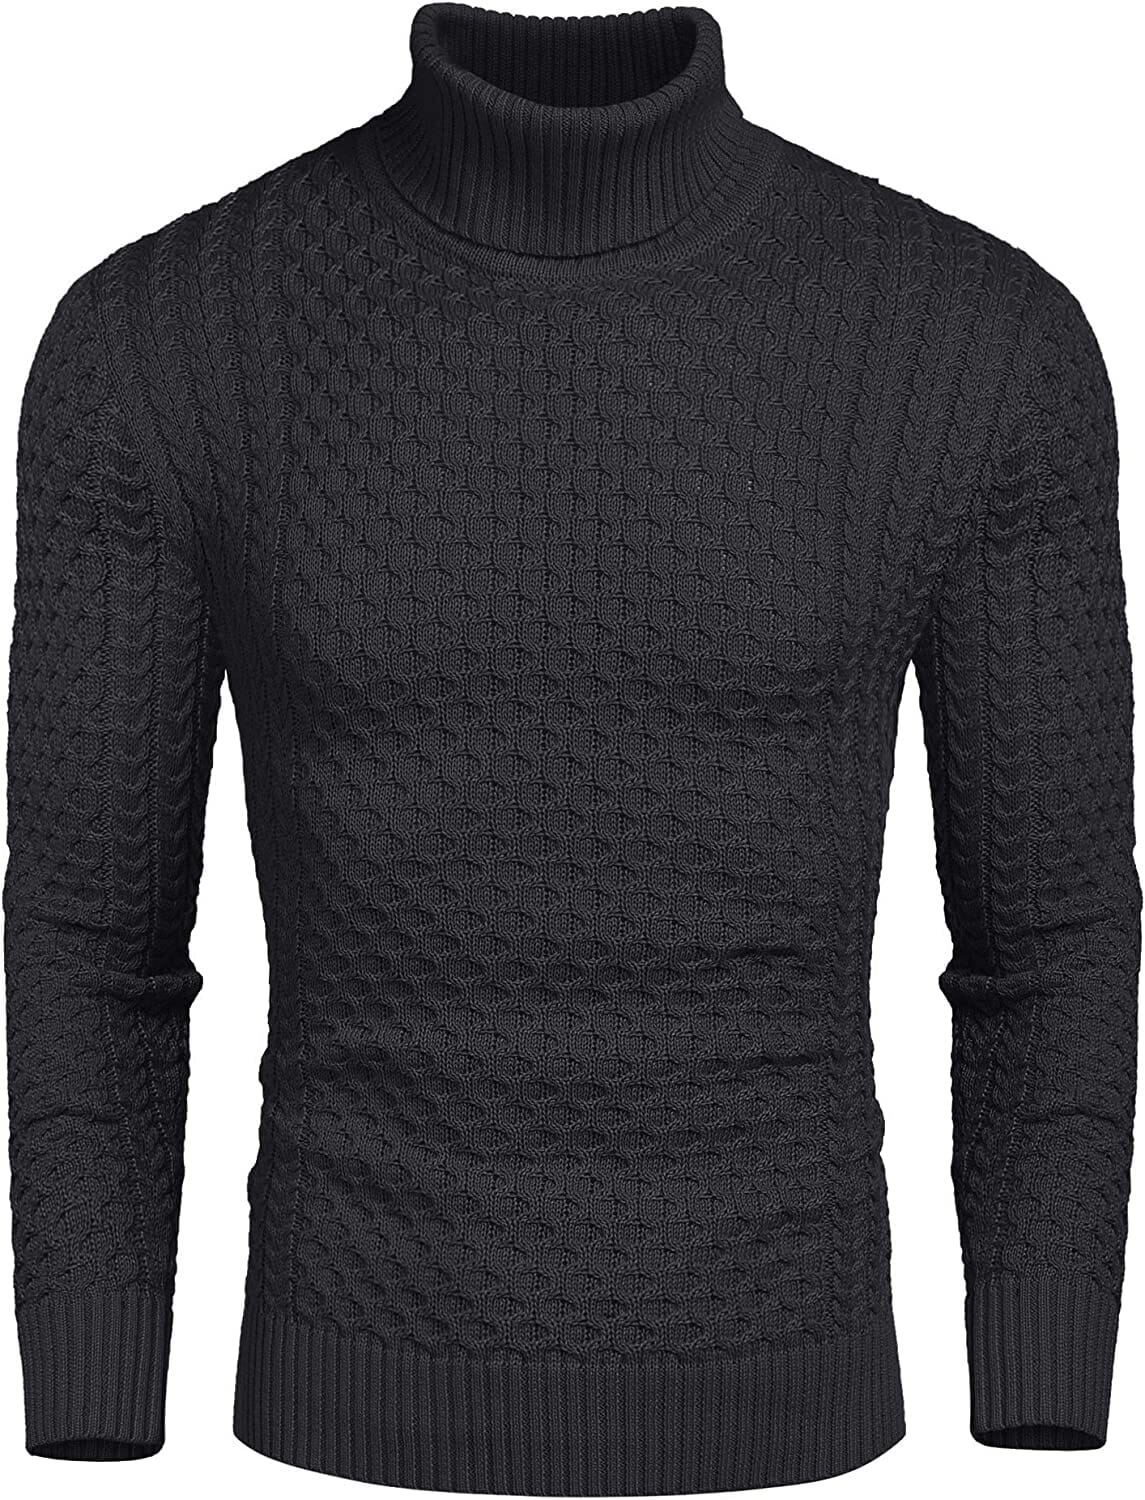 Slim Fit Turtleneck Knitted Twisted Pullover Sweaters (US Only) Sweaters Coofandy's Dark Gray S 